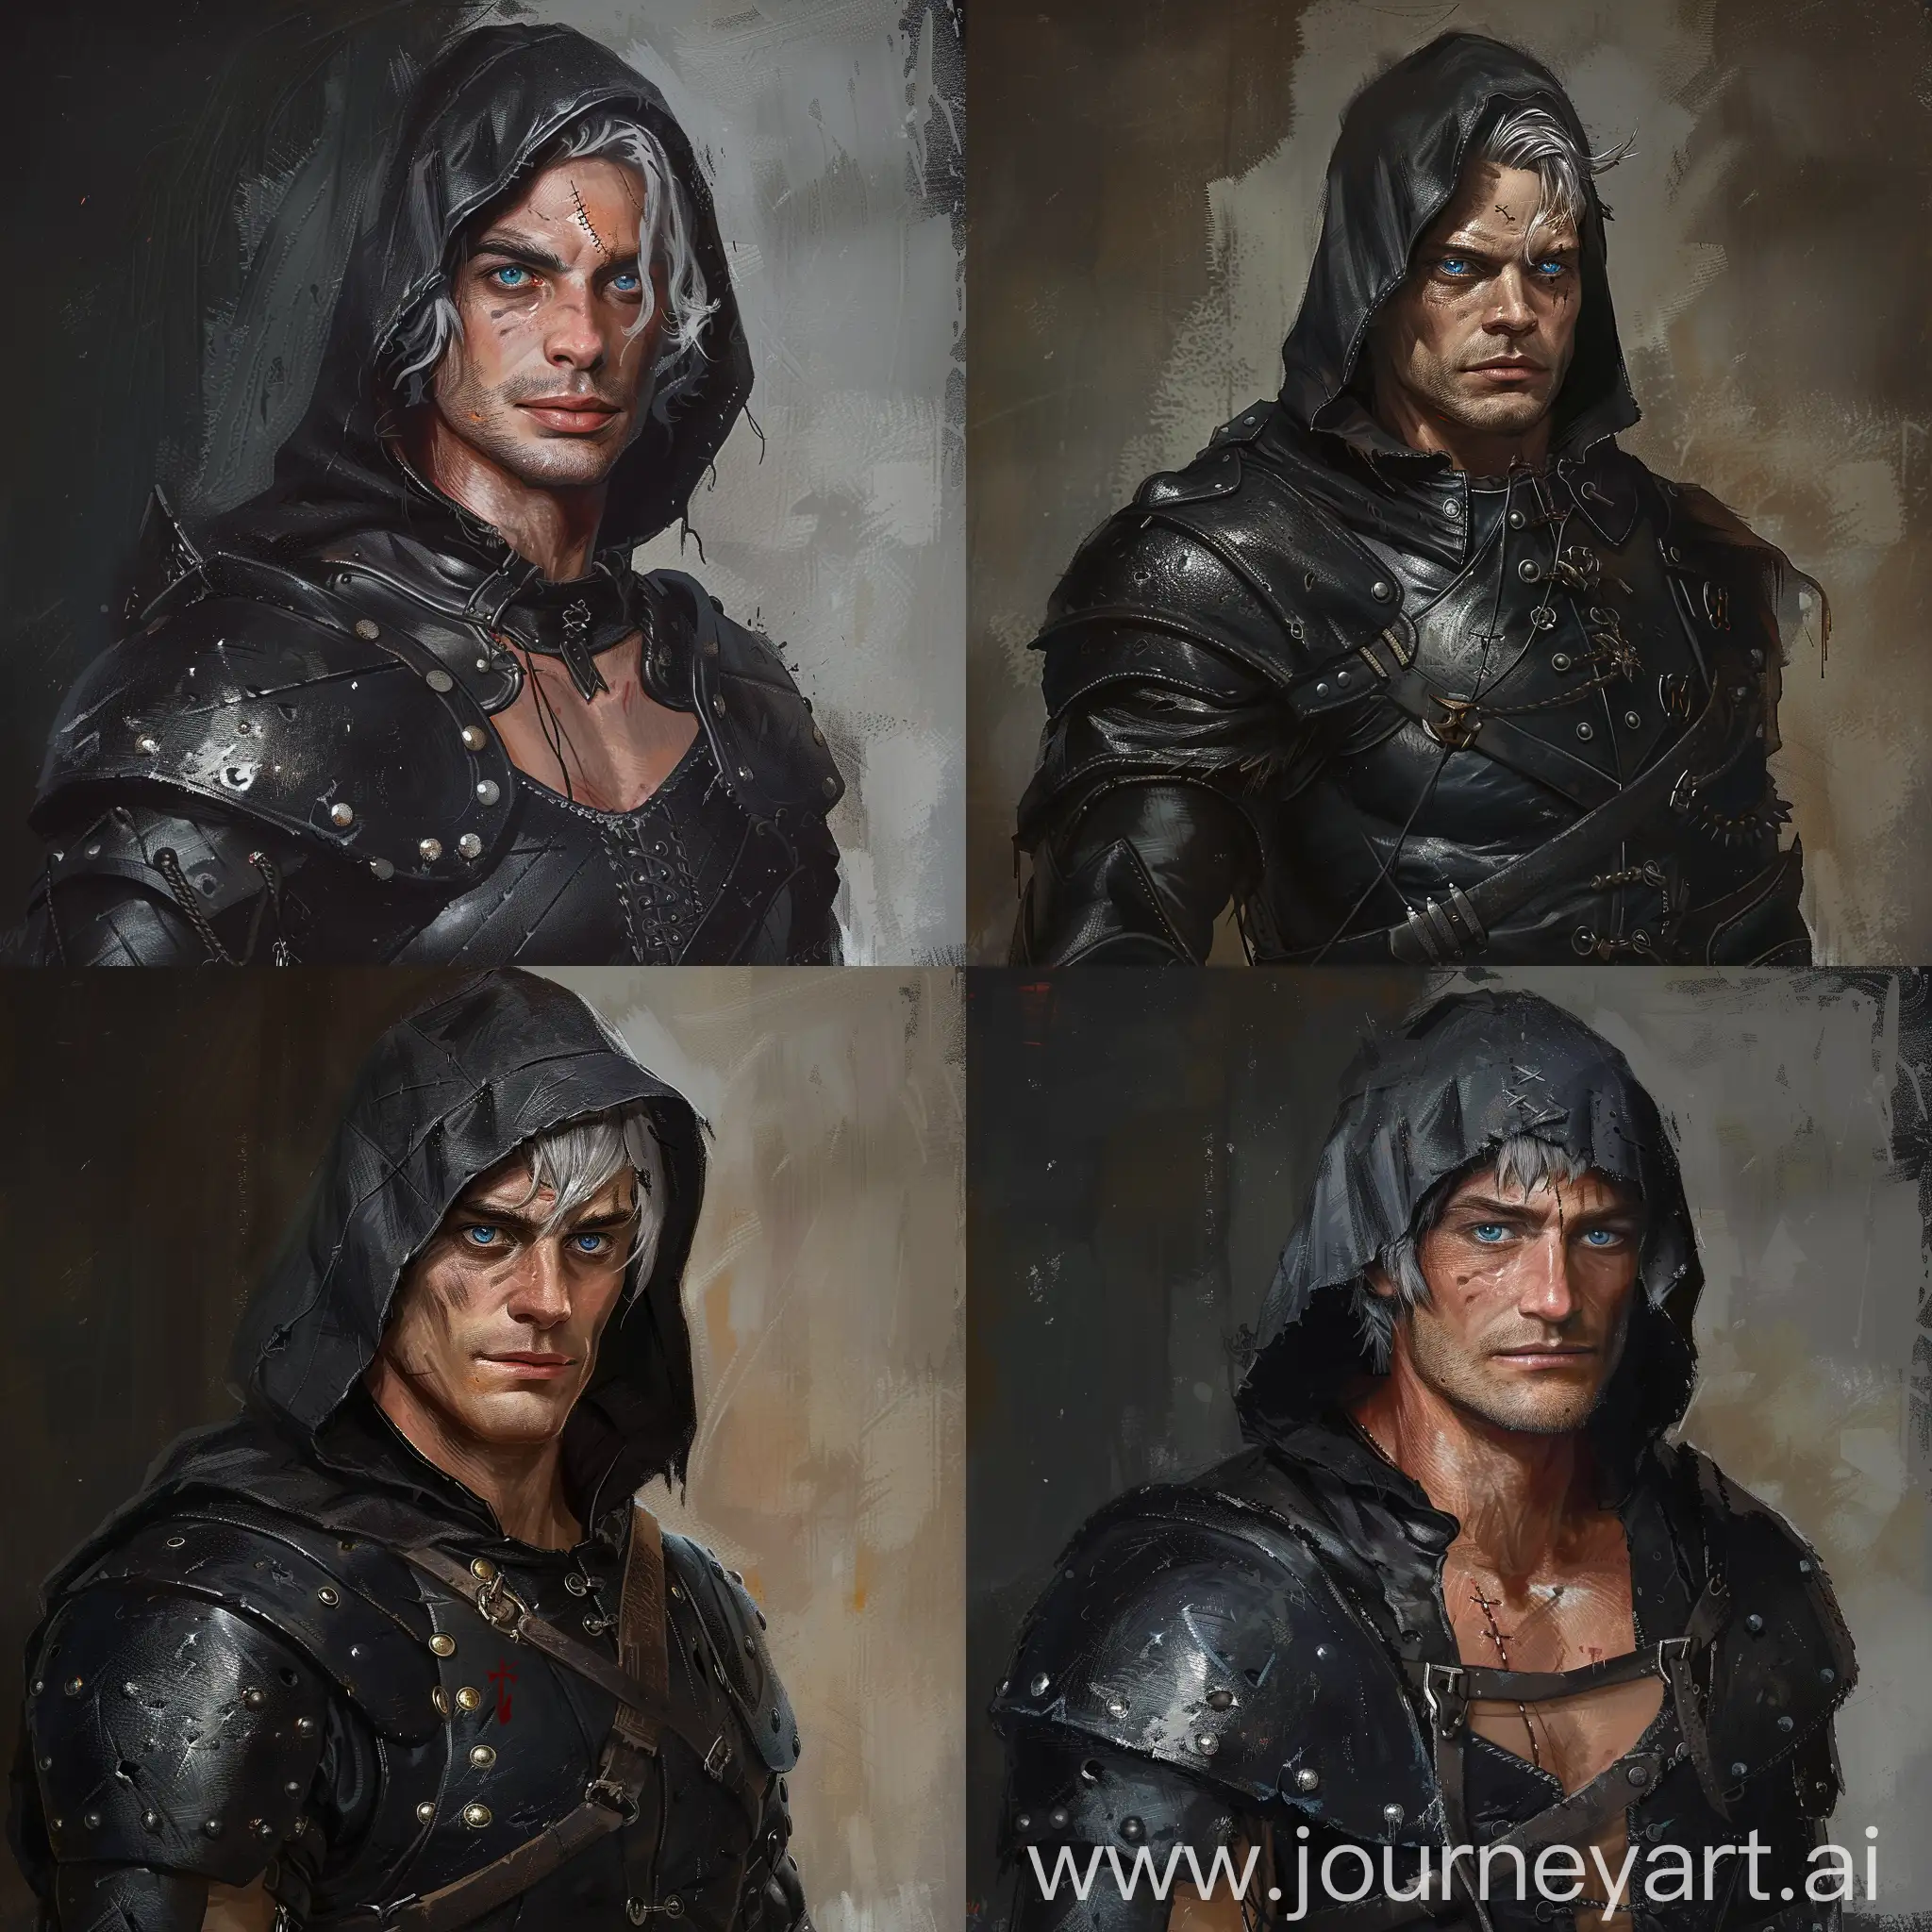 Medieval-Soldier-Portrait-Black-Leather-Armor-Hooded-BlueEyed-Warrior